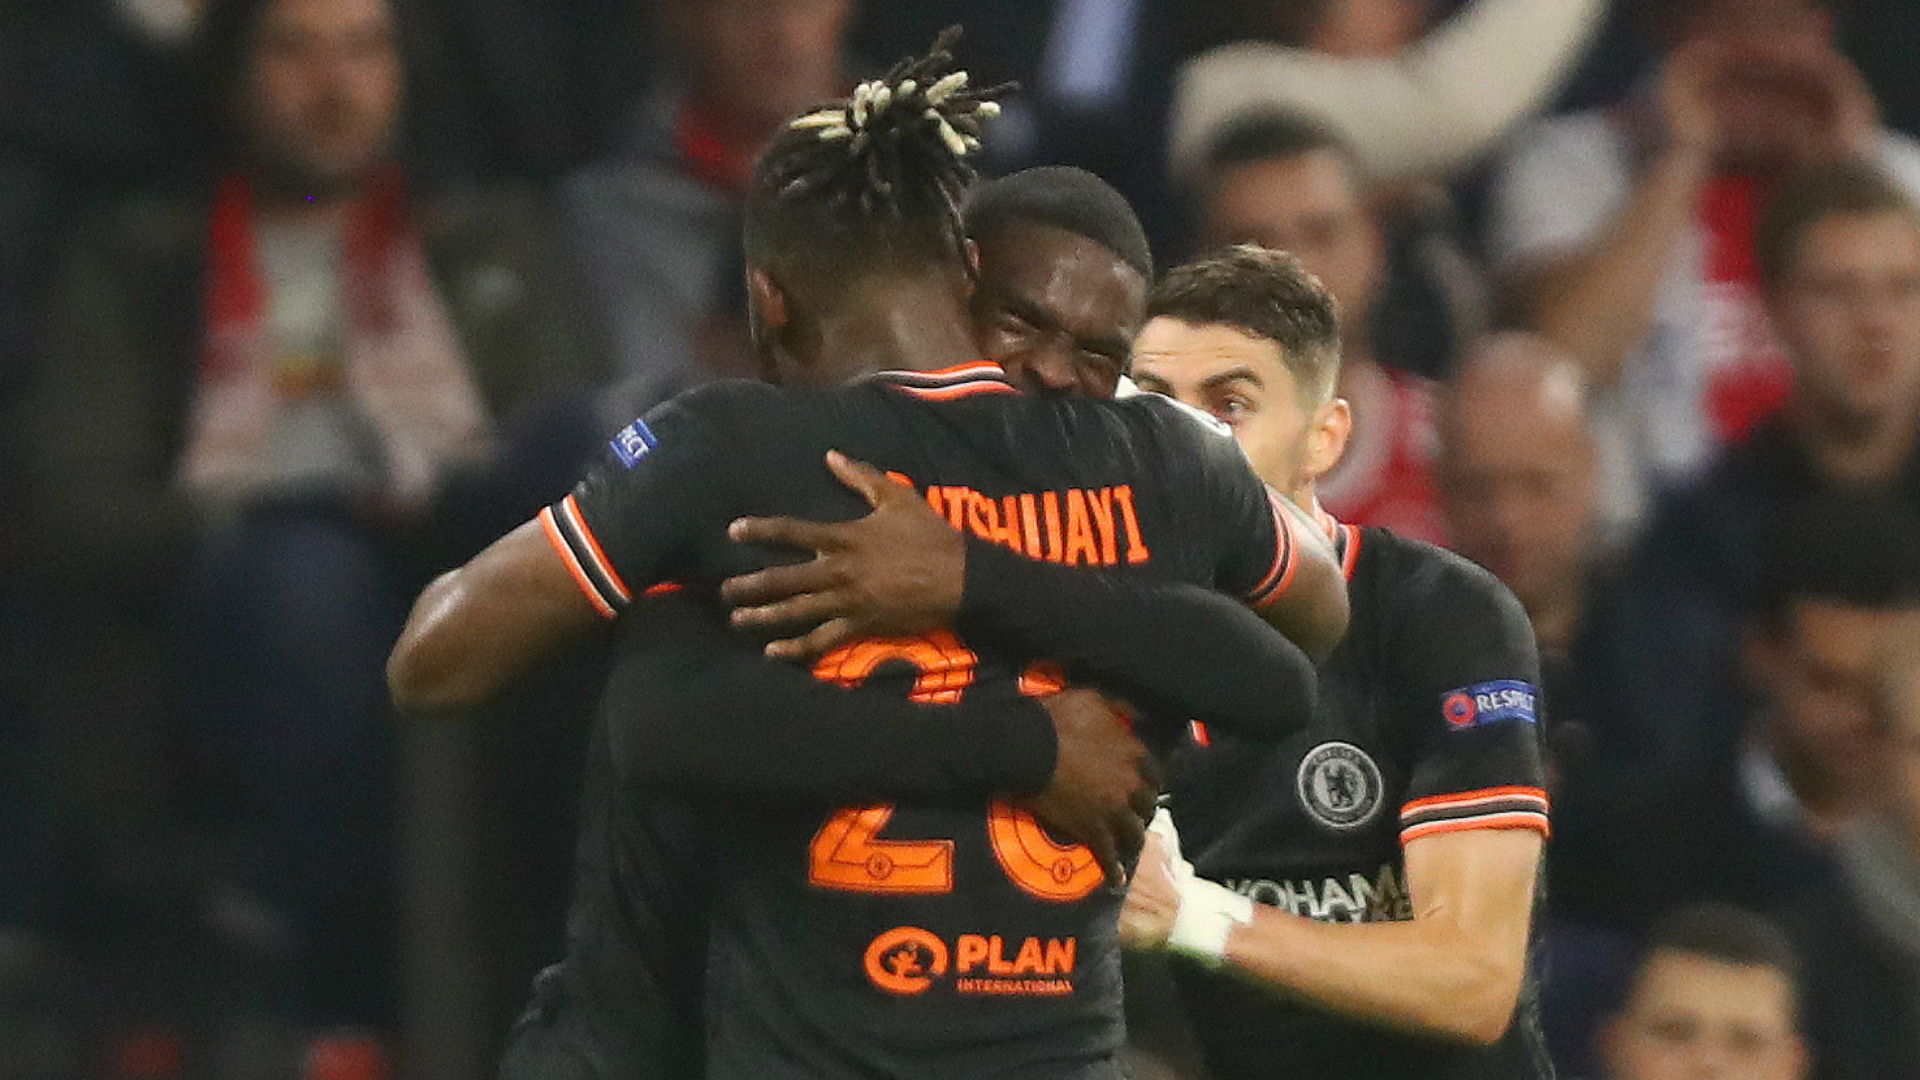 Michy Batshuayi secured a priceless three points for Chelsea at Ajax and Frank Lampard heaped praise on his striker.